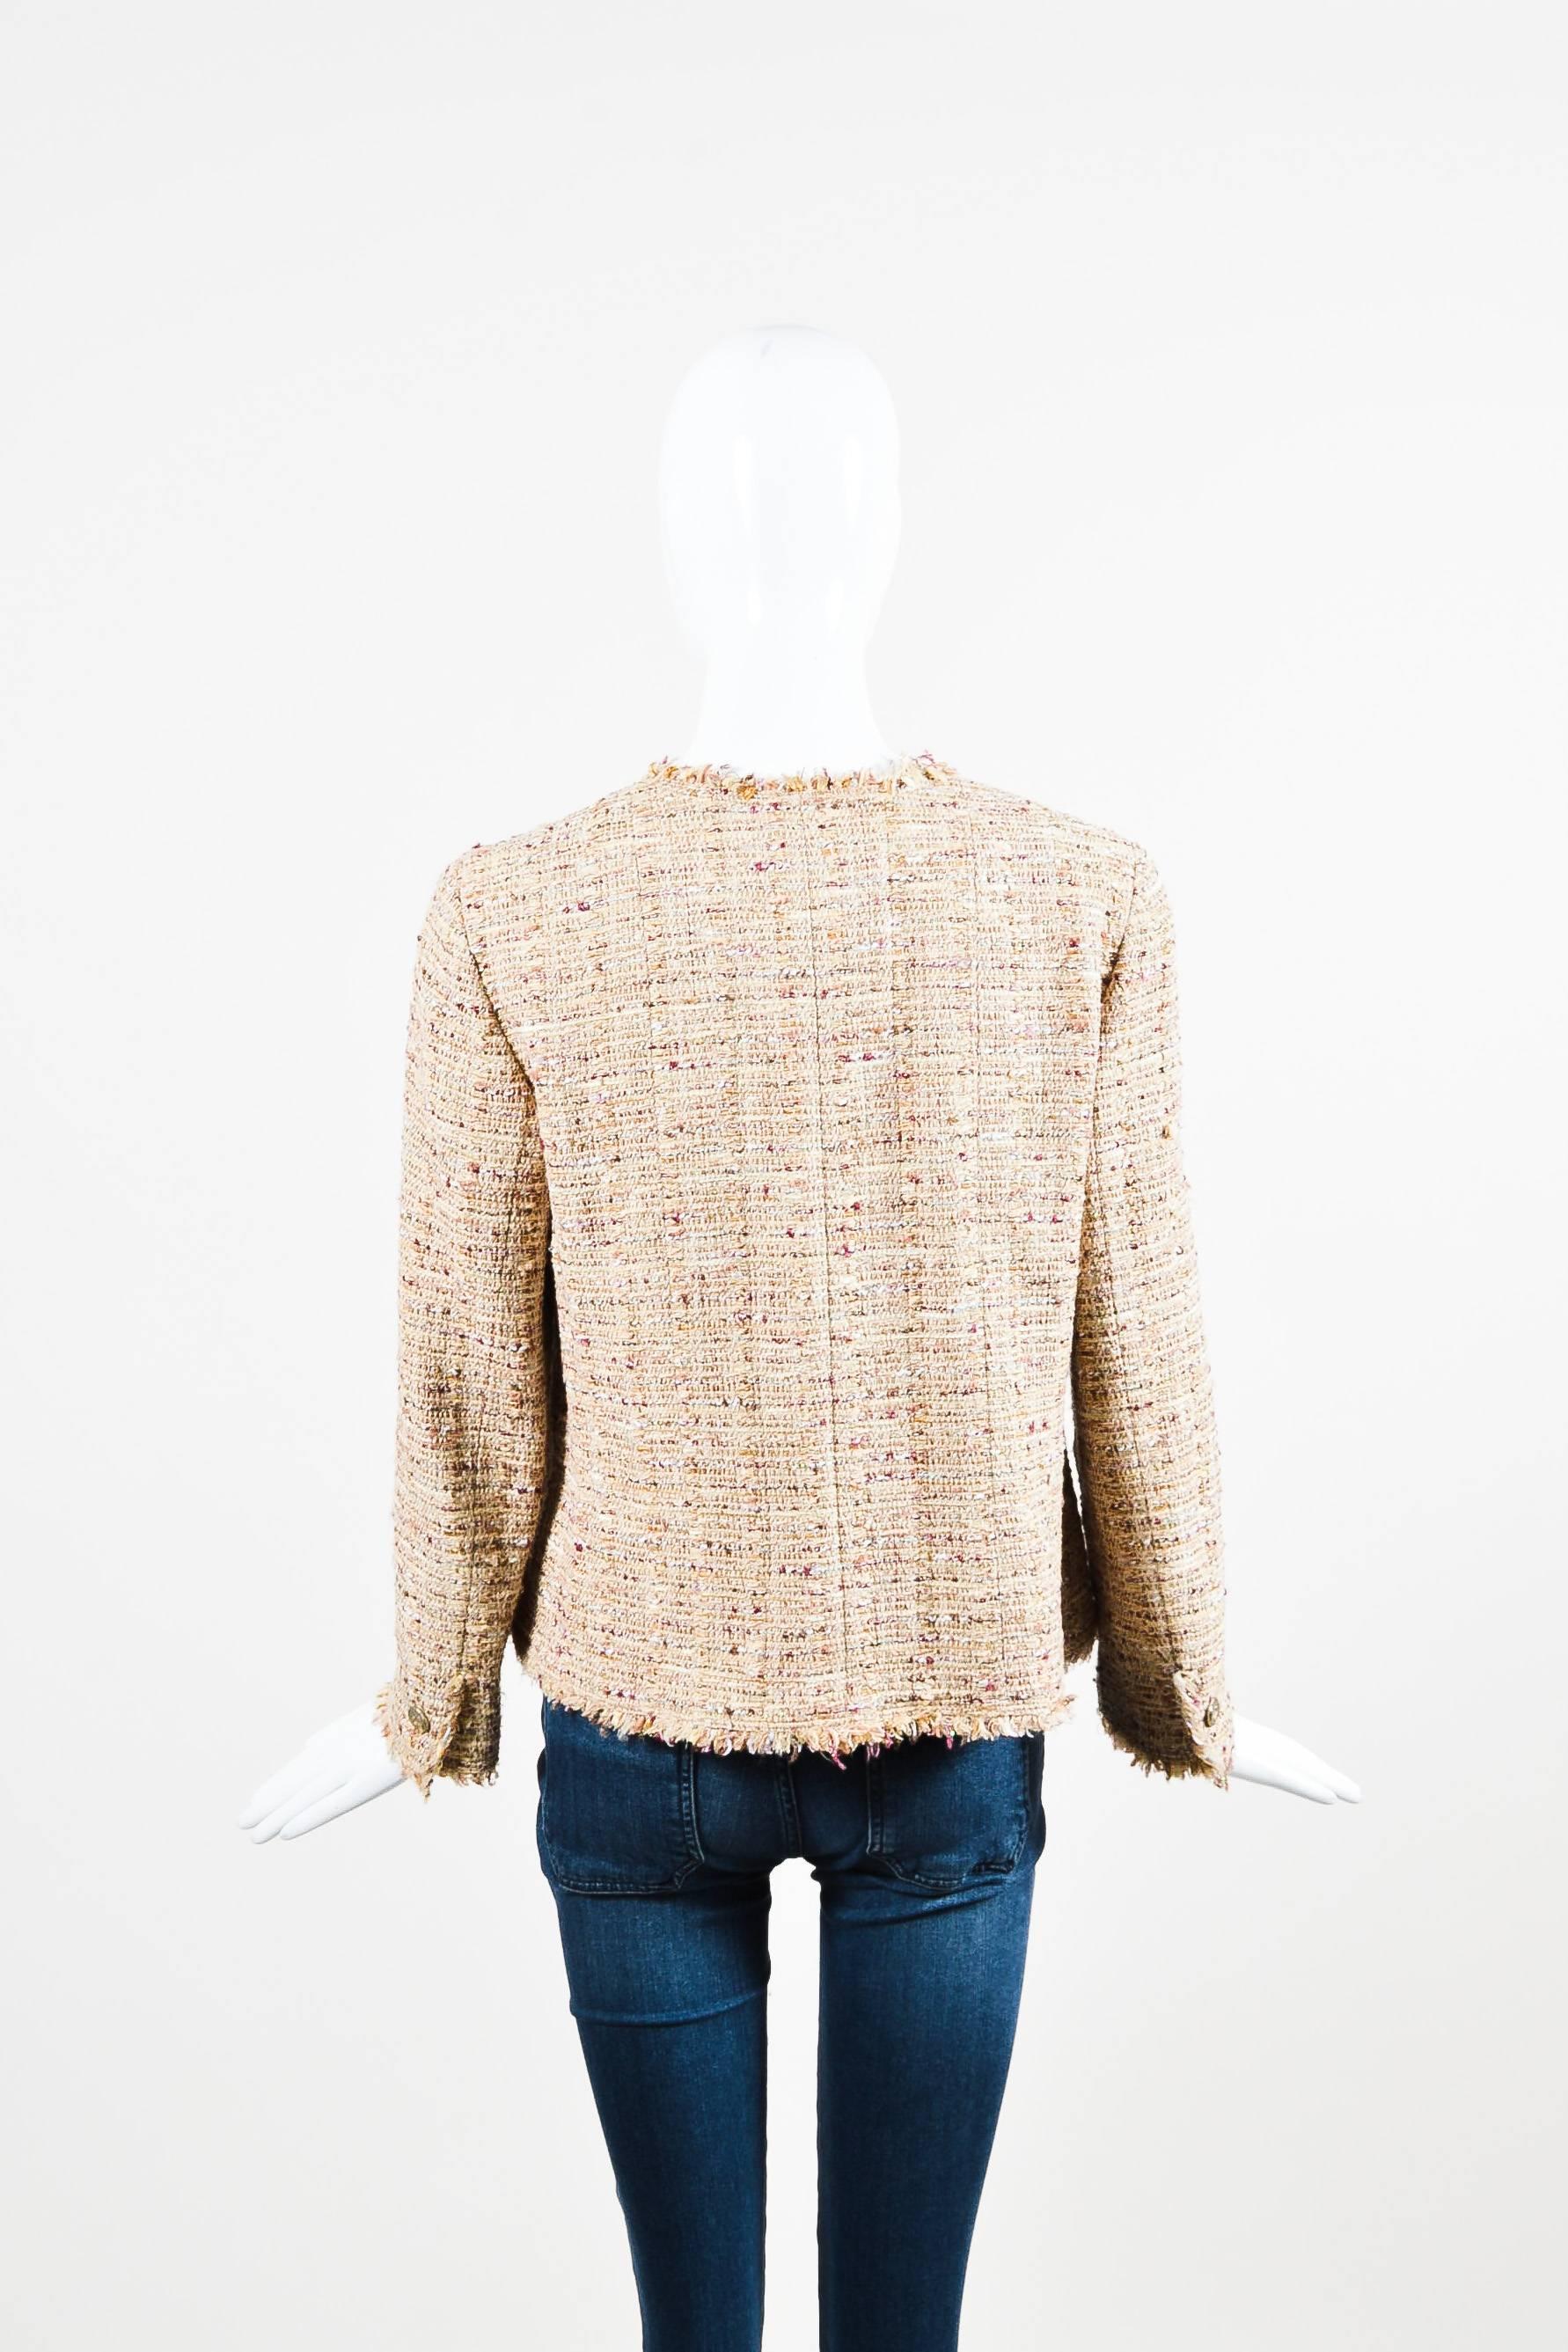 Classic Chanel tweed jacket. Multicolor weaving throughout with hints of iridescent threading. Fringe trimmings. Hammered gold-tone coated buttons. Long sleeves with button closure. Jewel neckline. Front patch pockets with button closure. Buttons at